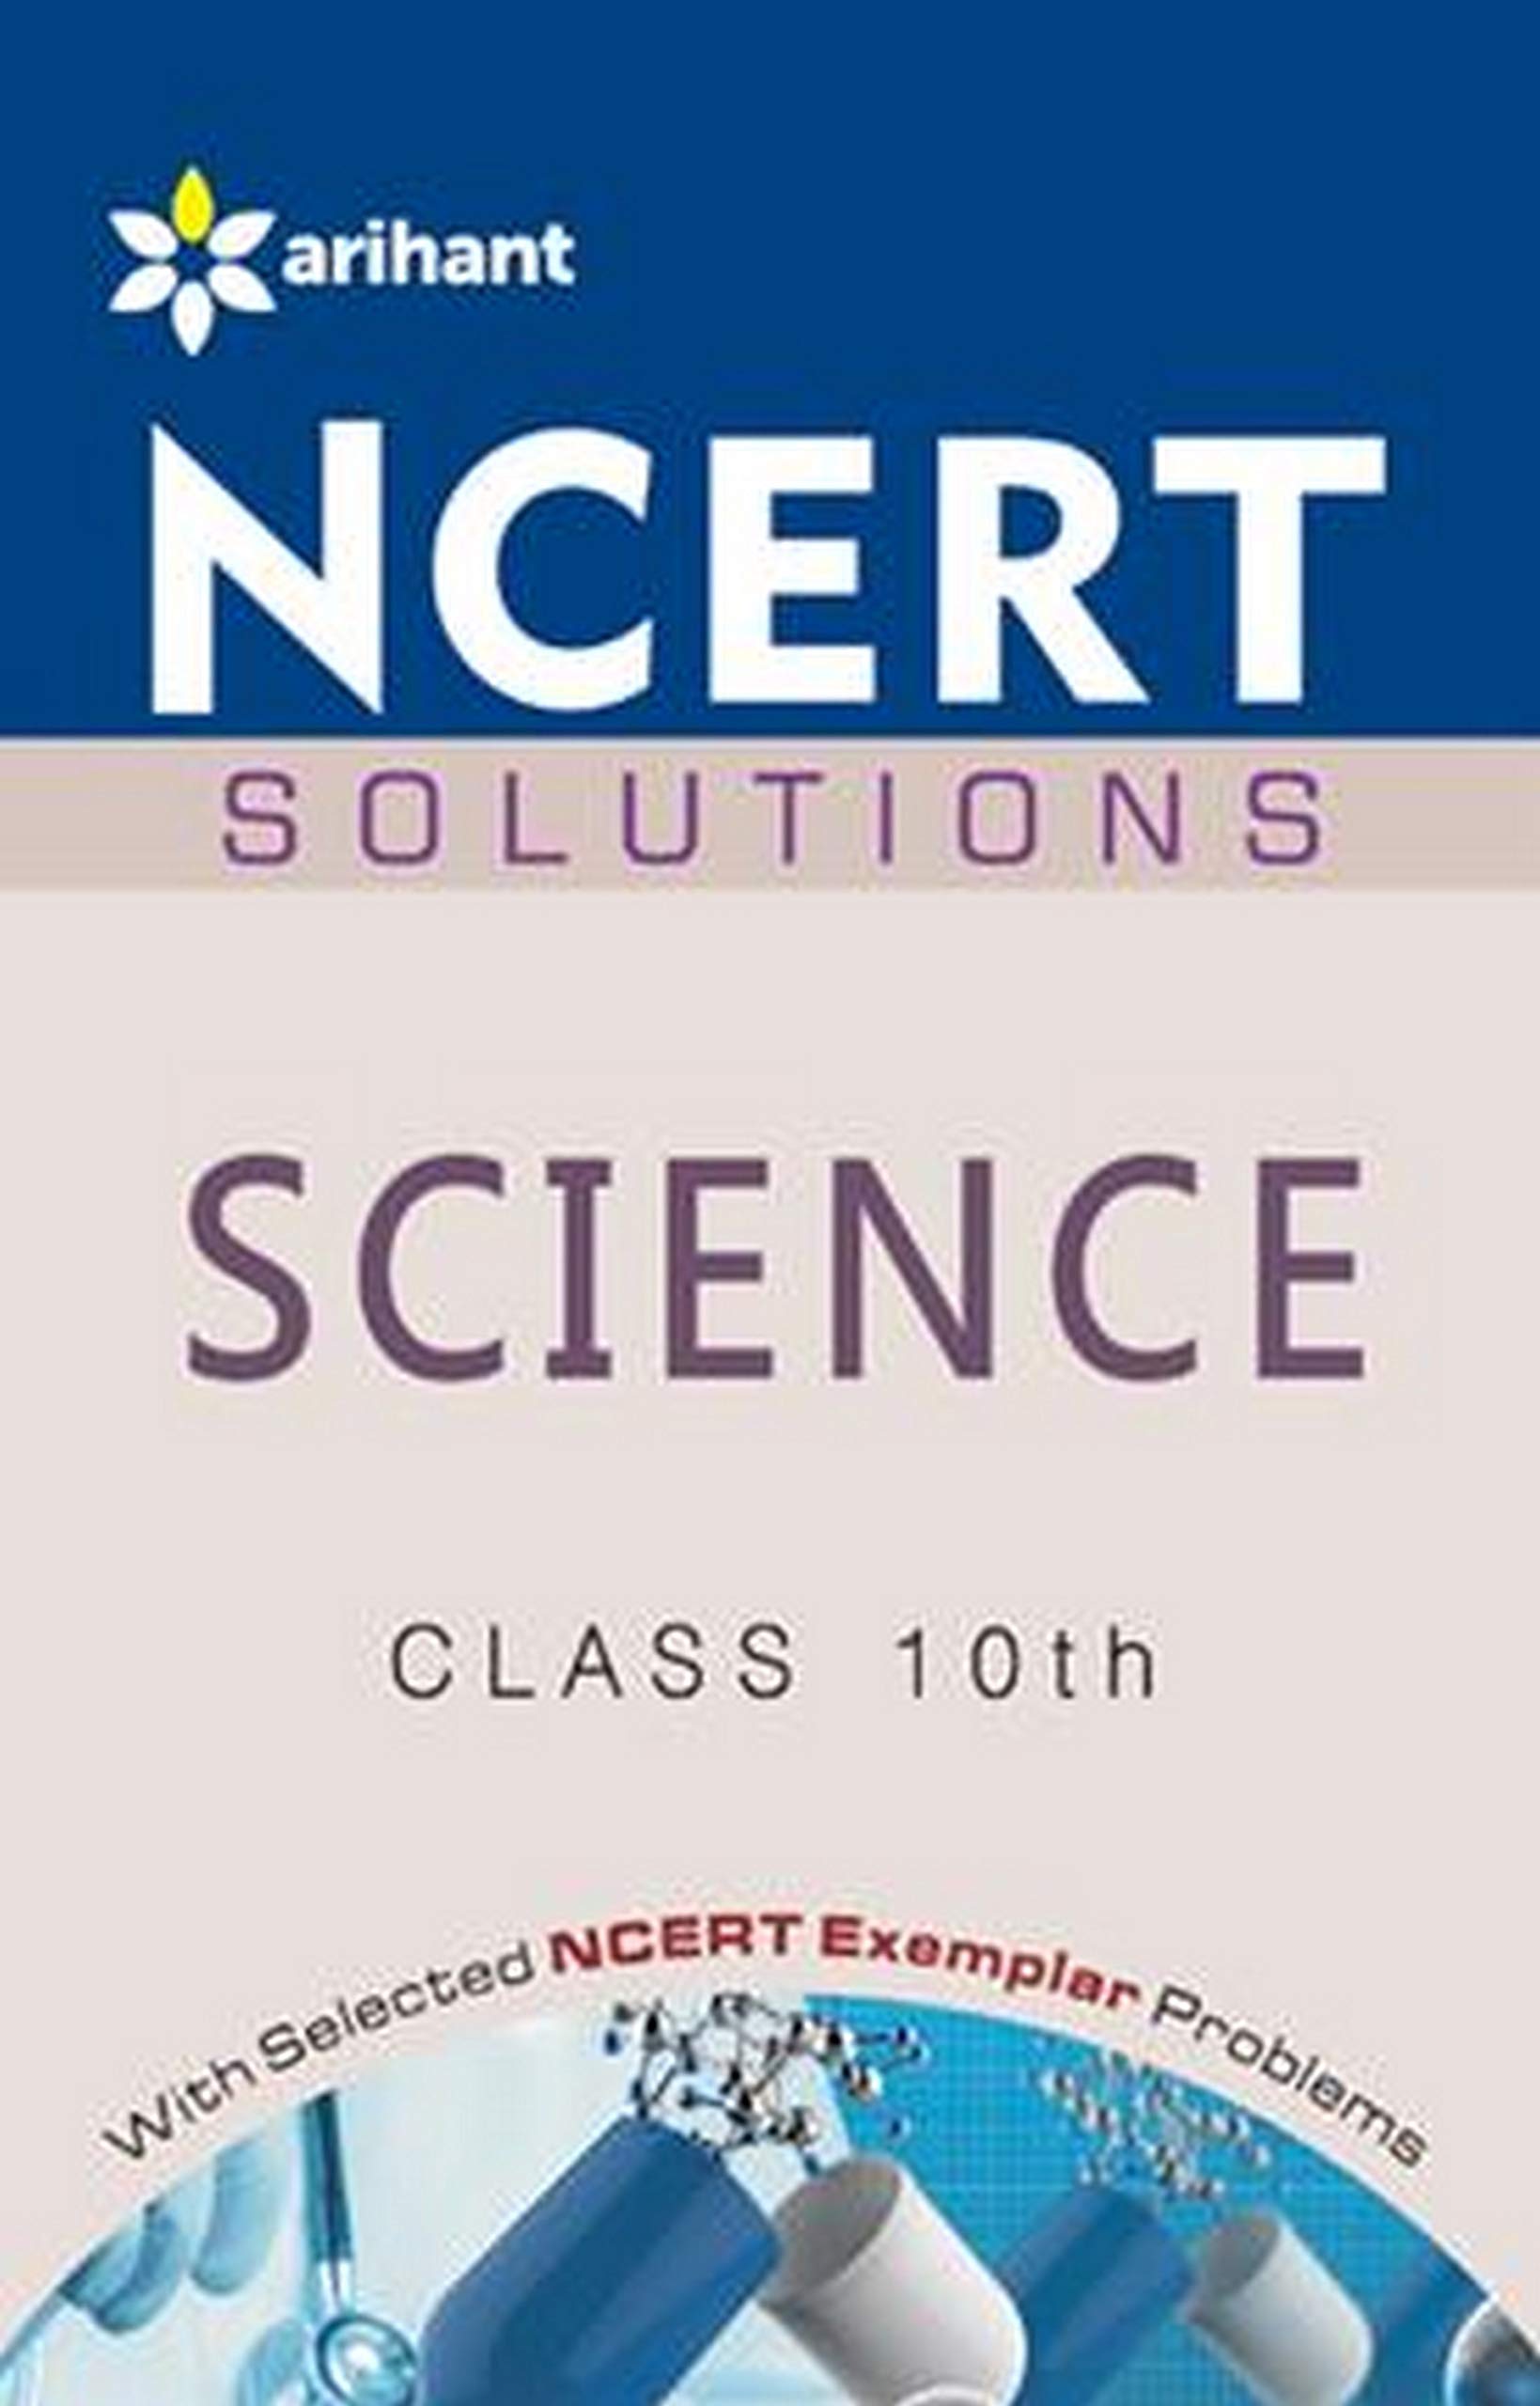 NCERT Solutions - Science for Class X